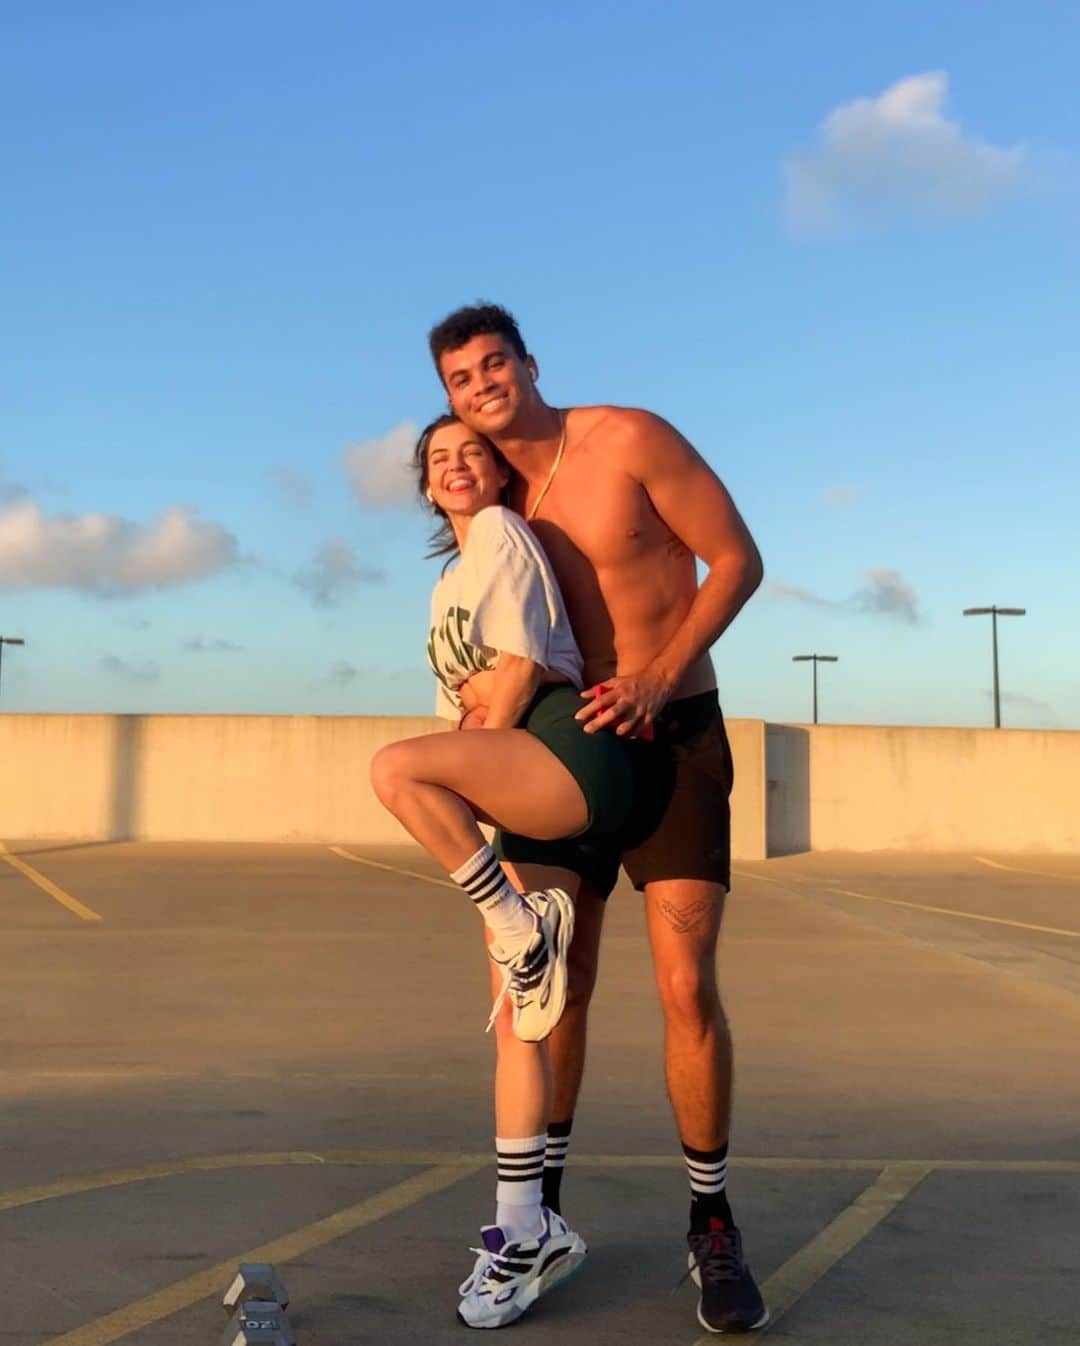 Nikki Blackketterのインスタグラム：「parking garage mini-workout + x10000 humidity + prettiest lil sunset + breaks trying dirty dancing moves before we decided maybe we shouldn’t test it out on the concrete hahaha happy Monday 😊- best times with the Tedster ❤️」